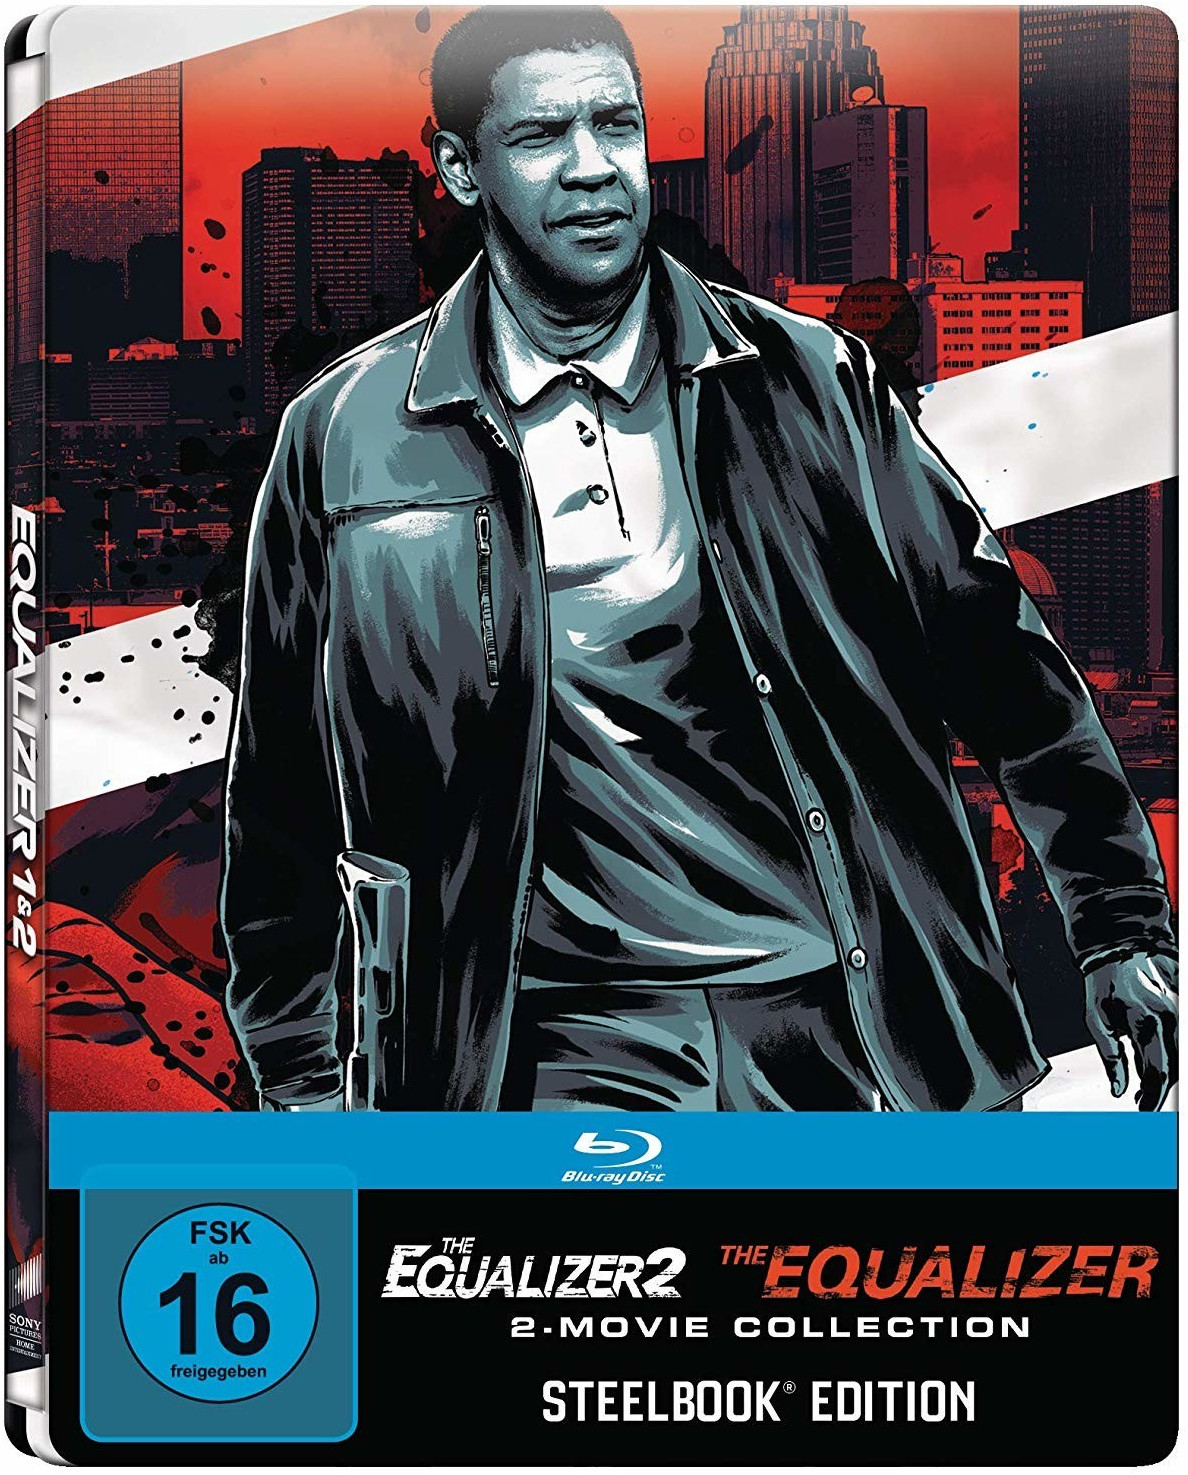 The Equalizer 2 + The Equalizer (2-Movie Collection) [Blu-ray]